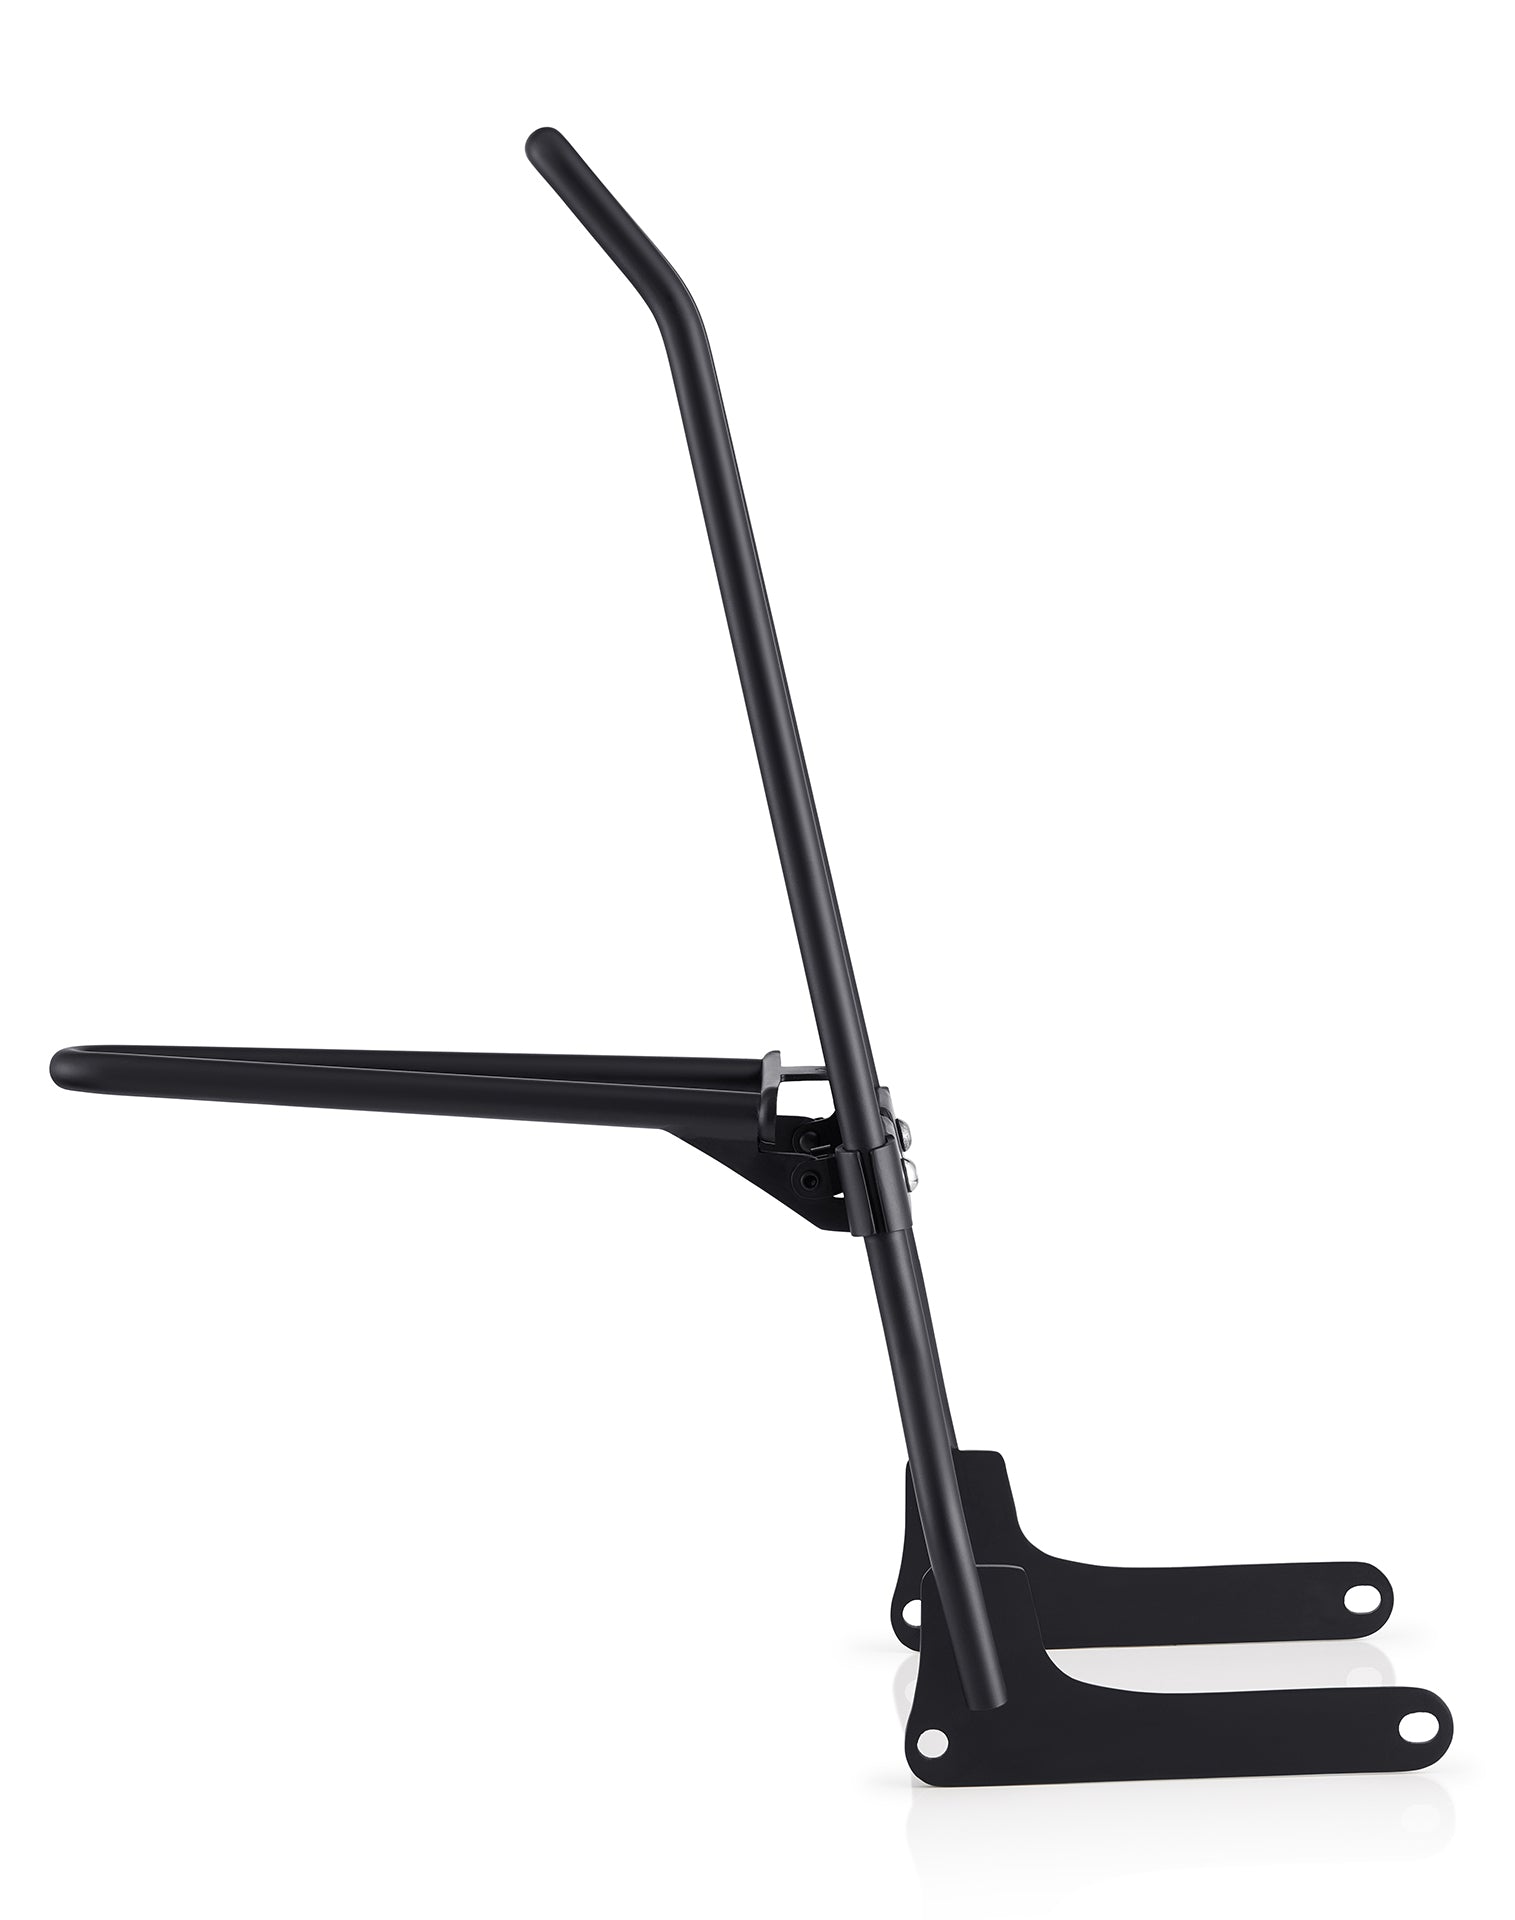 Iron Born Blade 25" Sissy Bar with Foldable Luggage Rack for Harley Softail Low Rider S FXLRS Matte Black